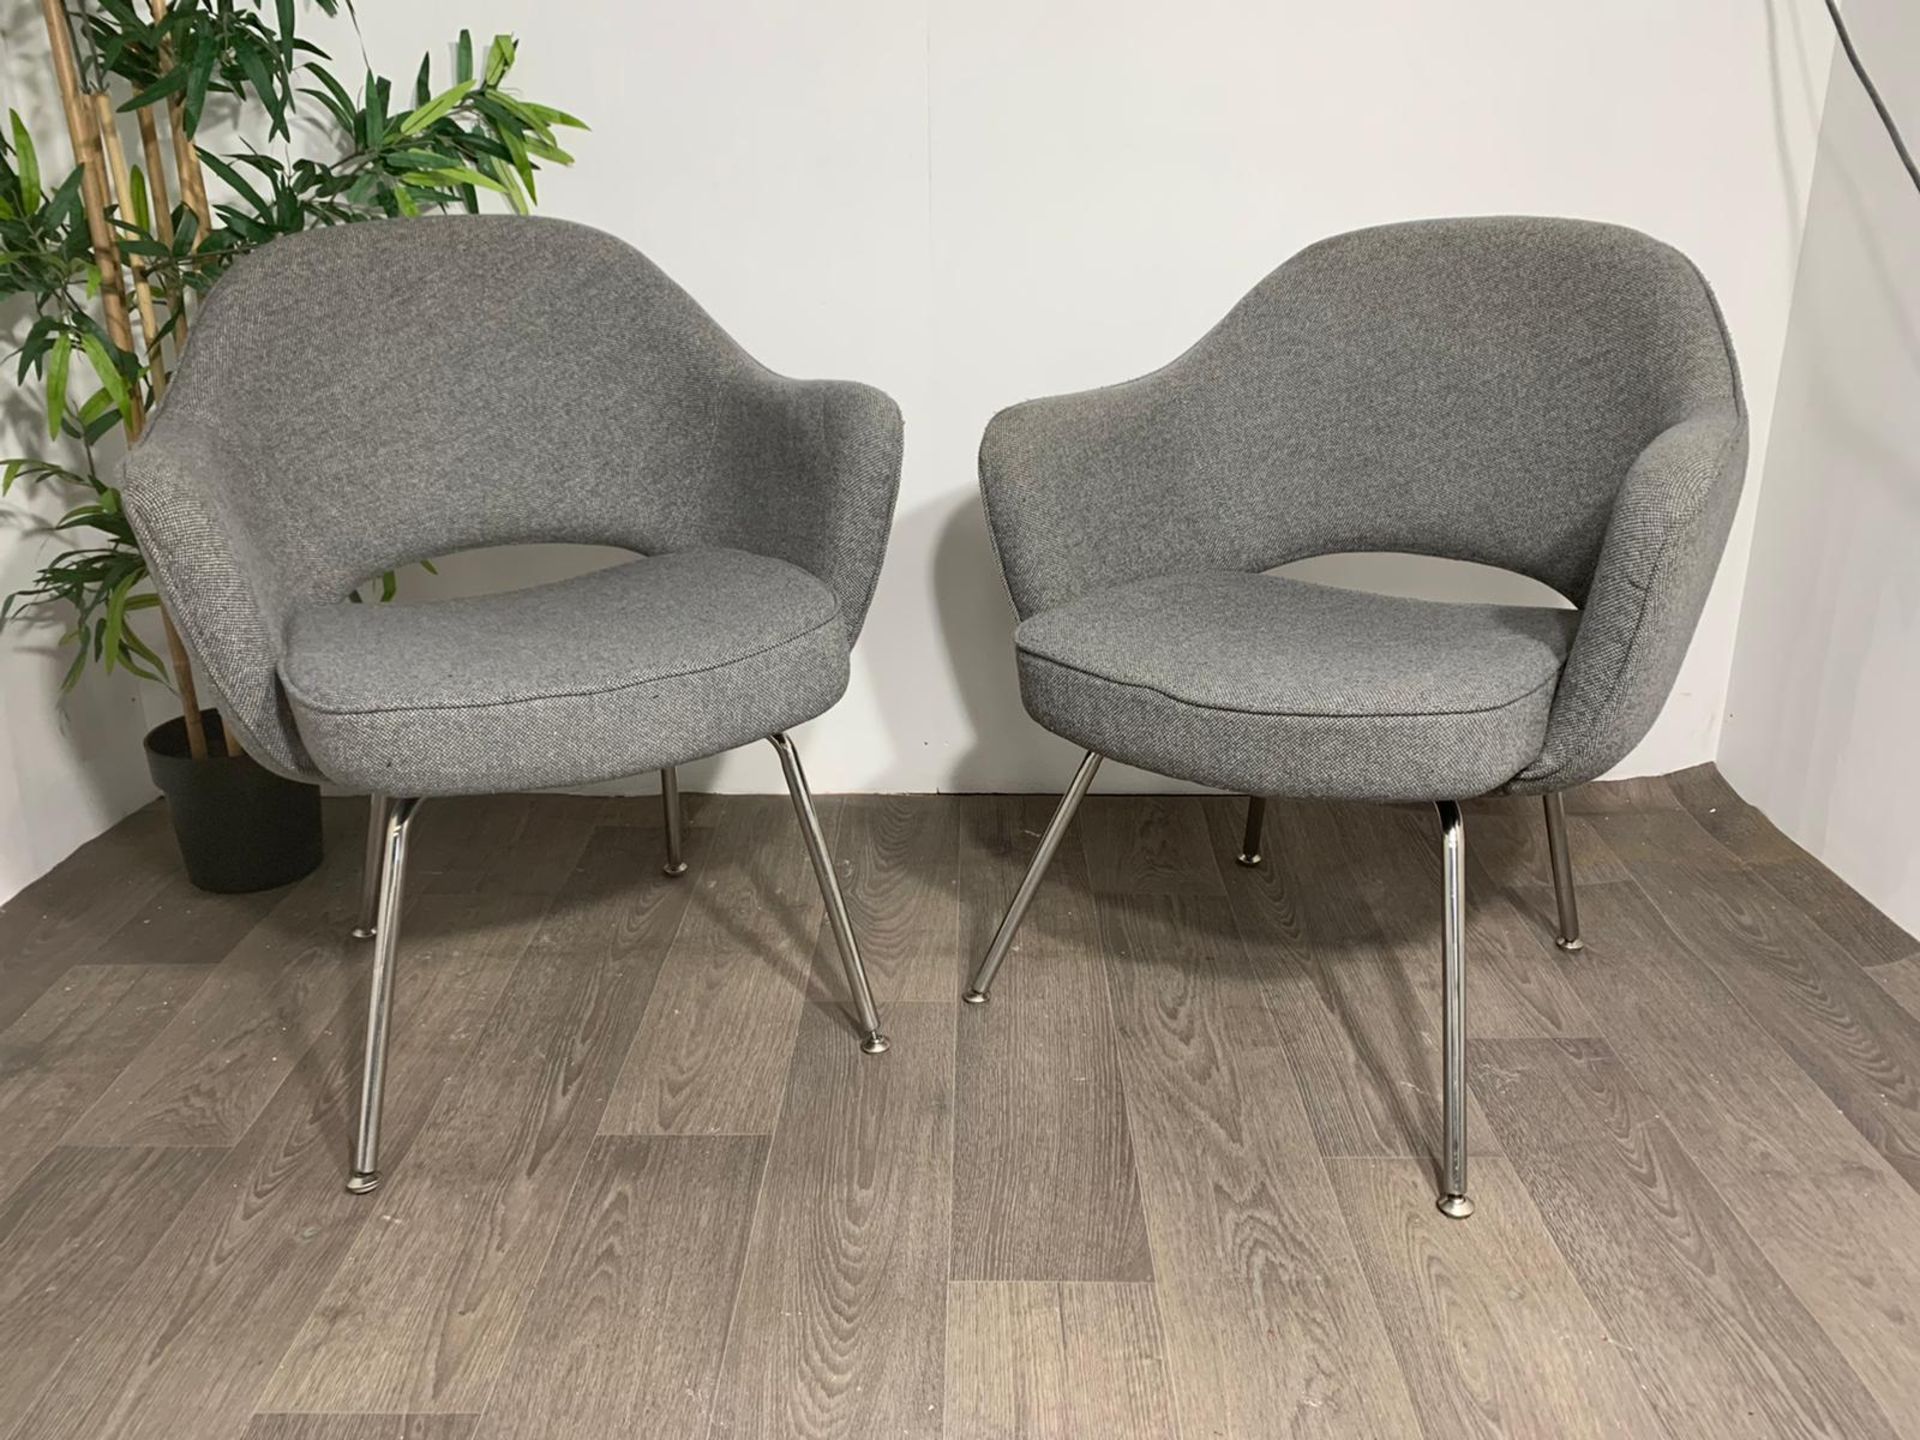 Grey Fabric Commercial Grade Chair with Chrome Legs x2 - Image 2 of 9